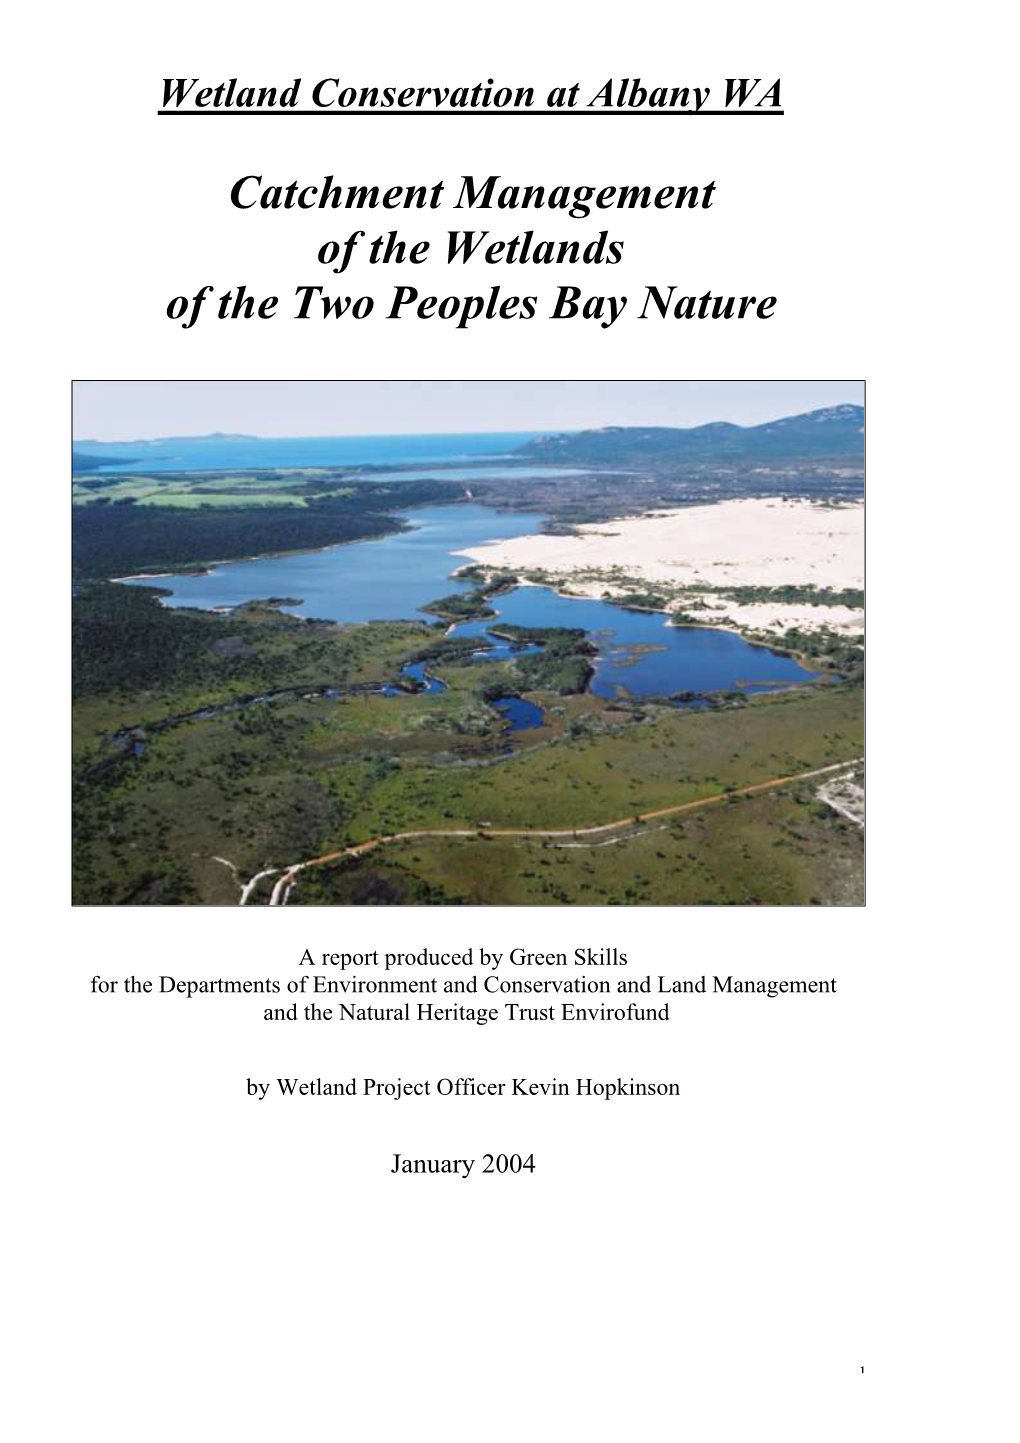 Catchment Management of the Wetlands of the Two Peoples Bay Nature Reserve